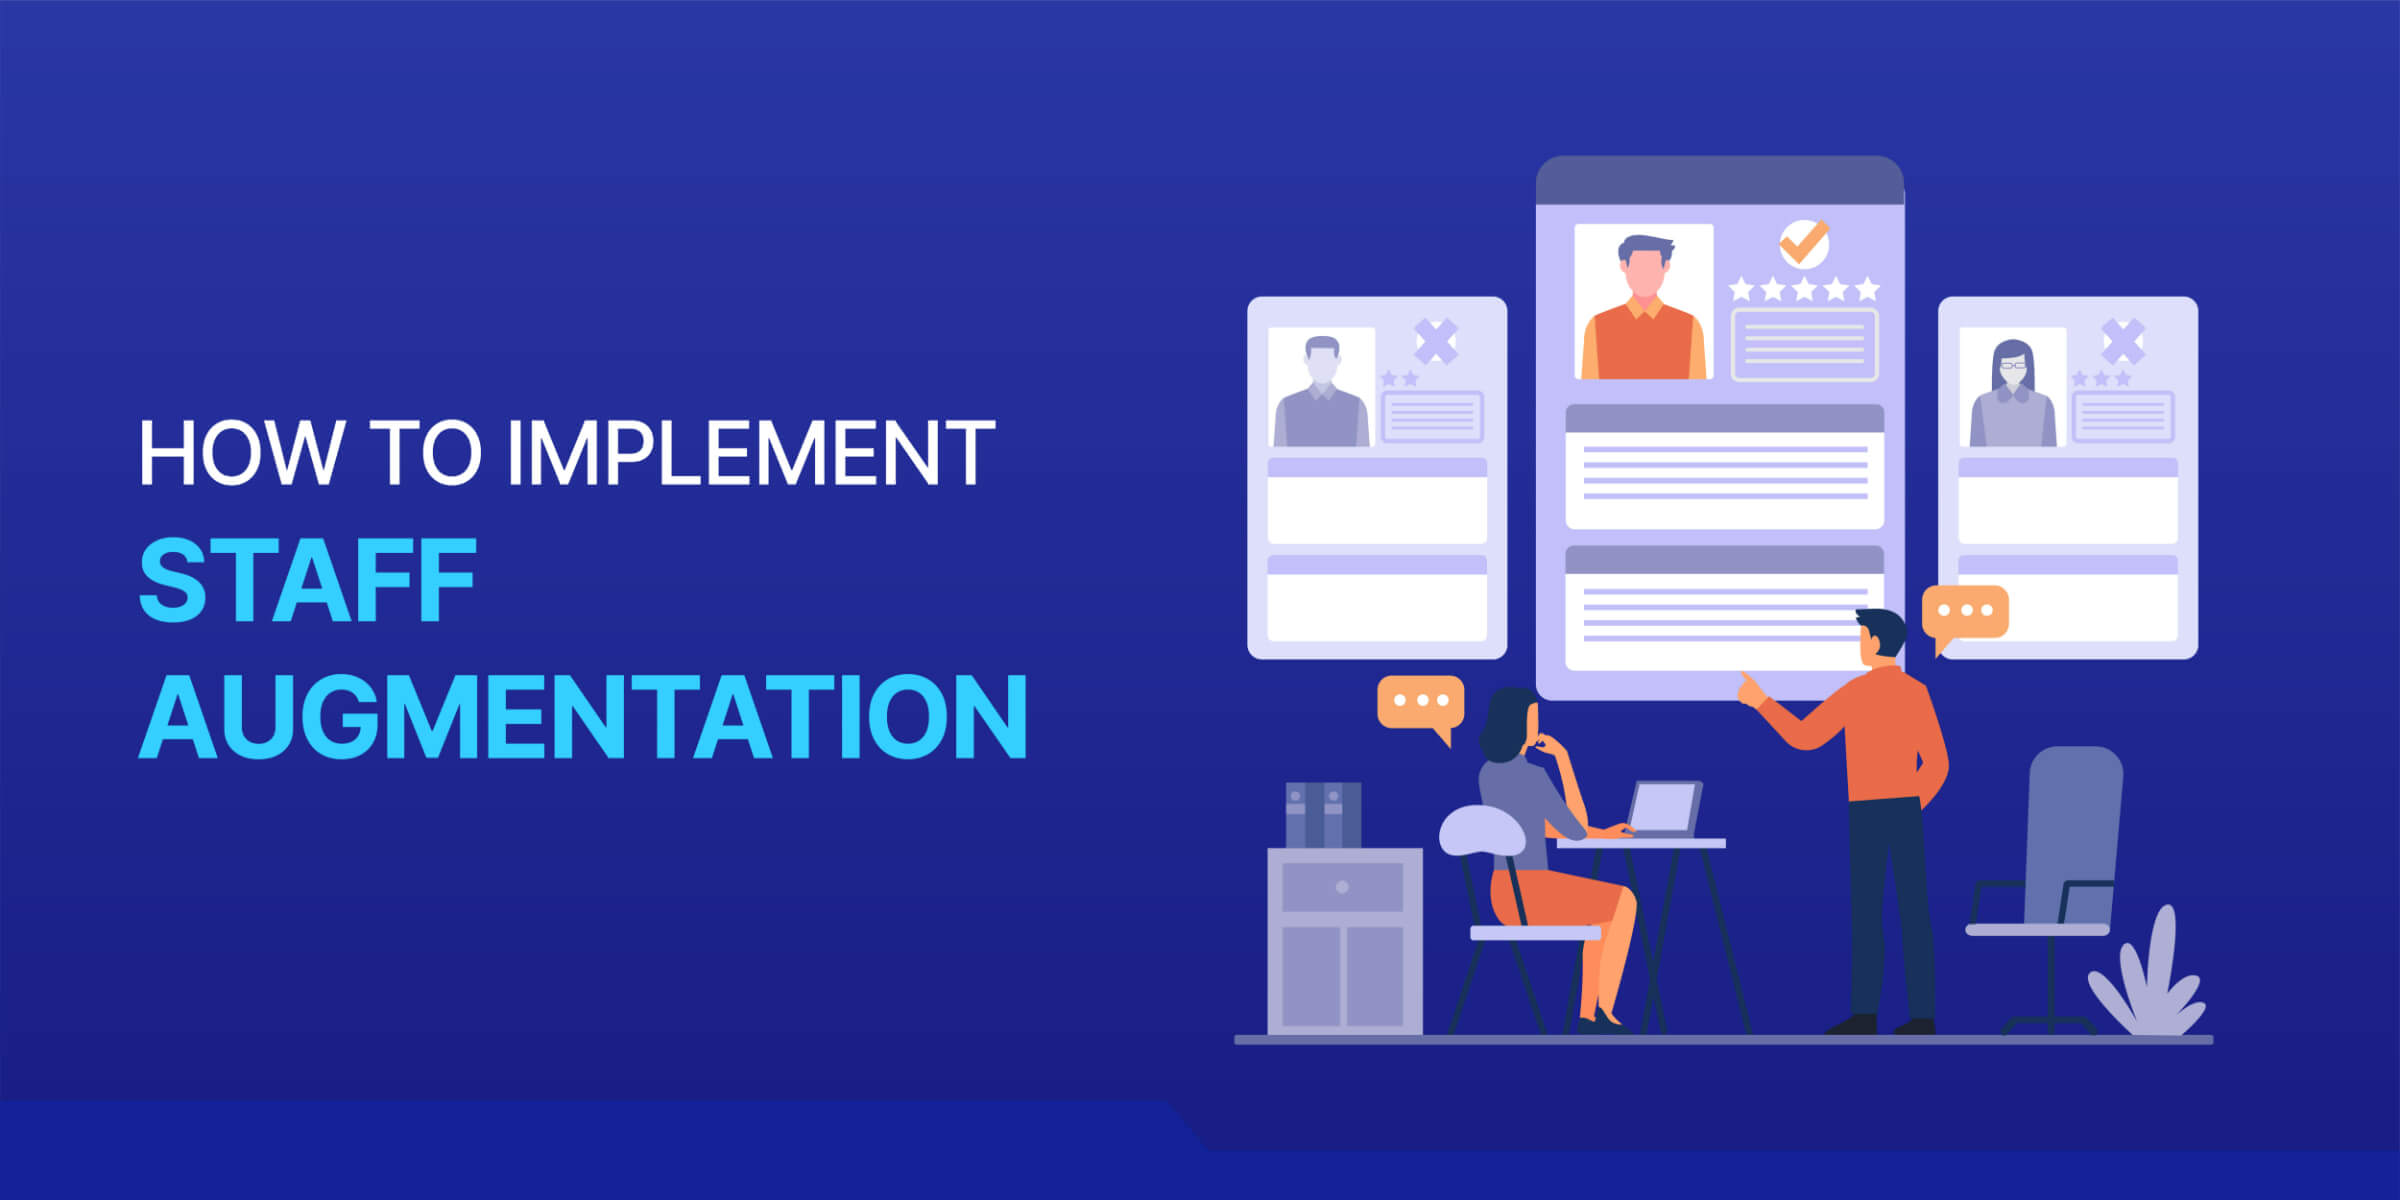 How to Implement Staff Augmentation